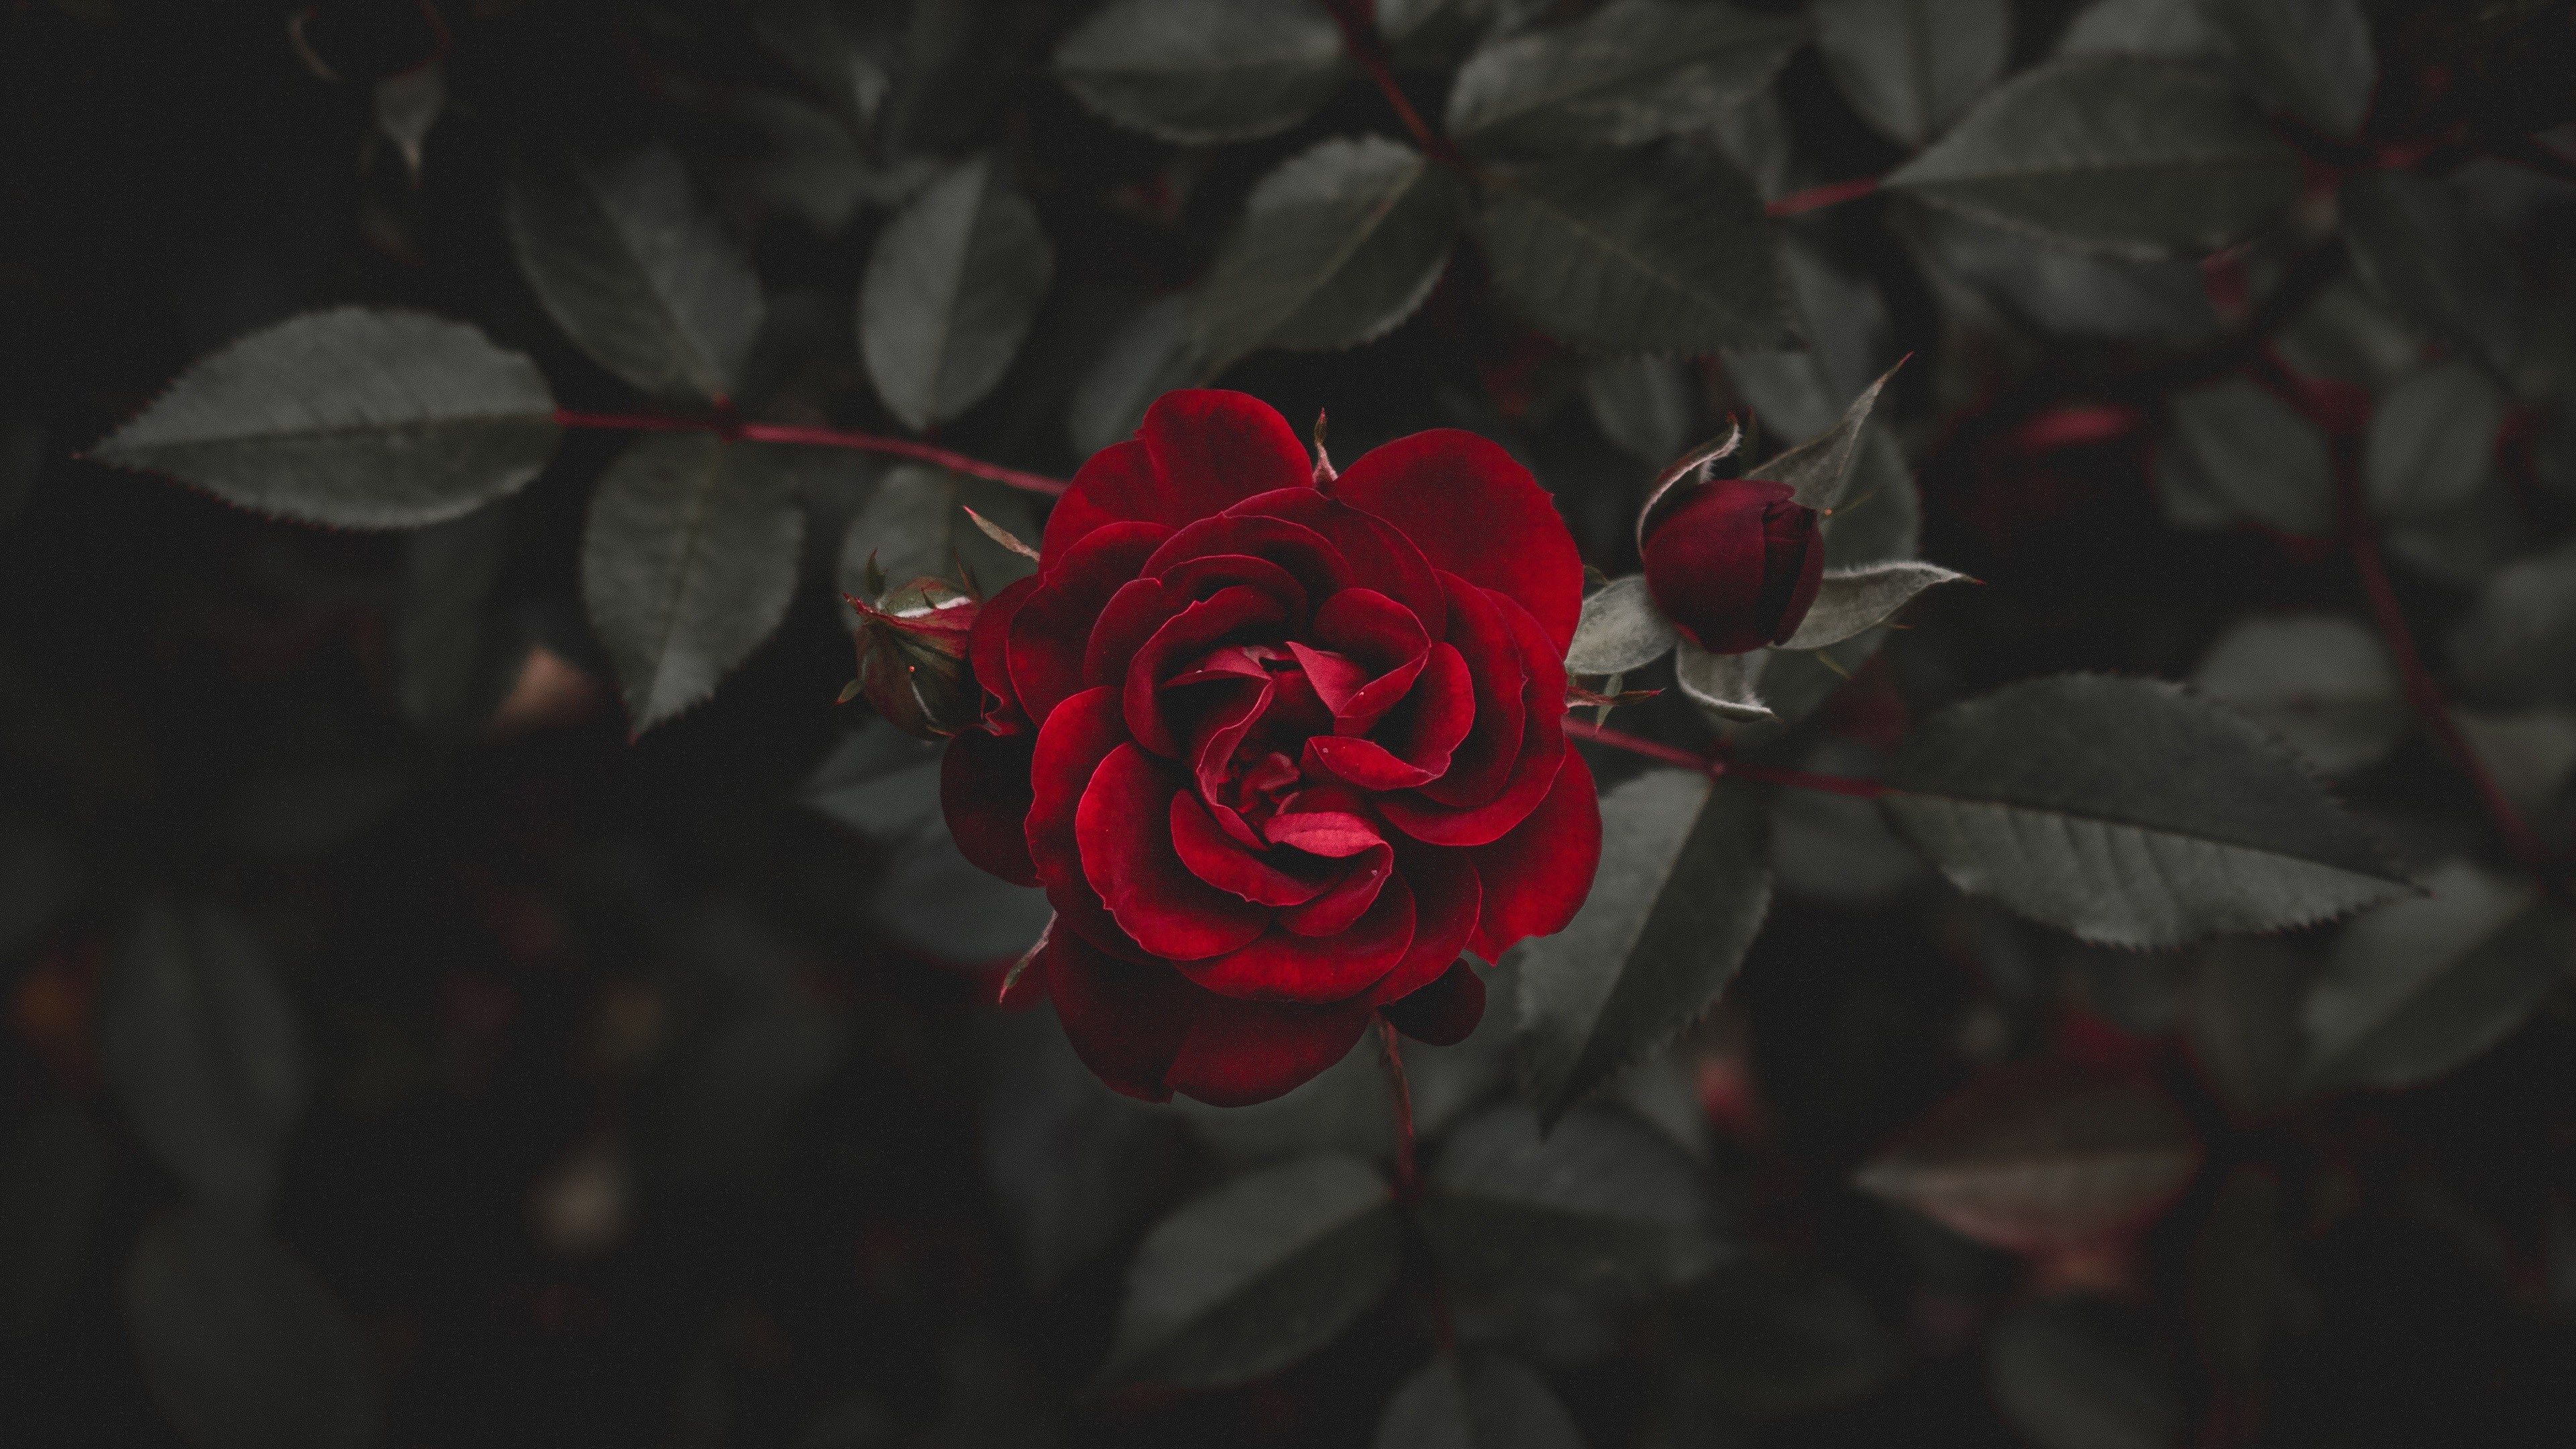 Cool Aesthetic Roses Wallpaper For iPhone image